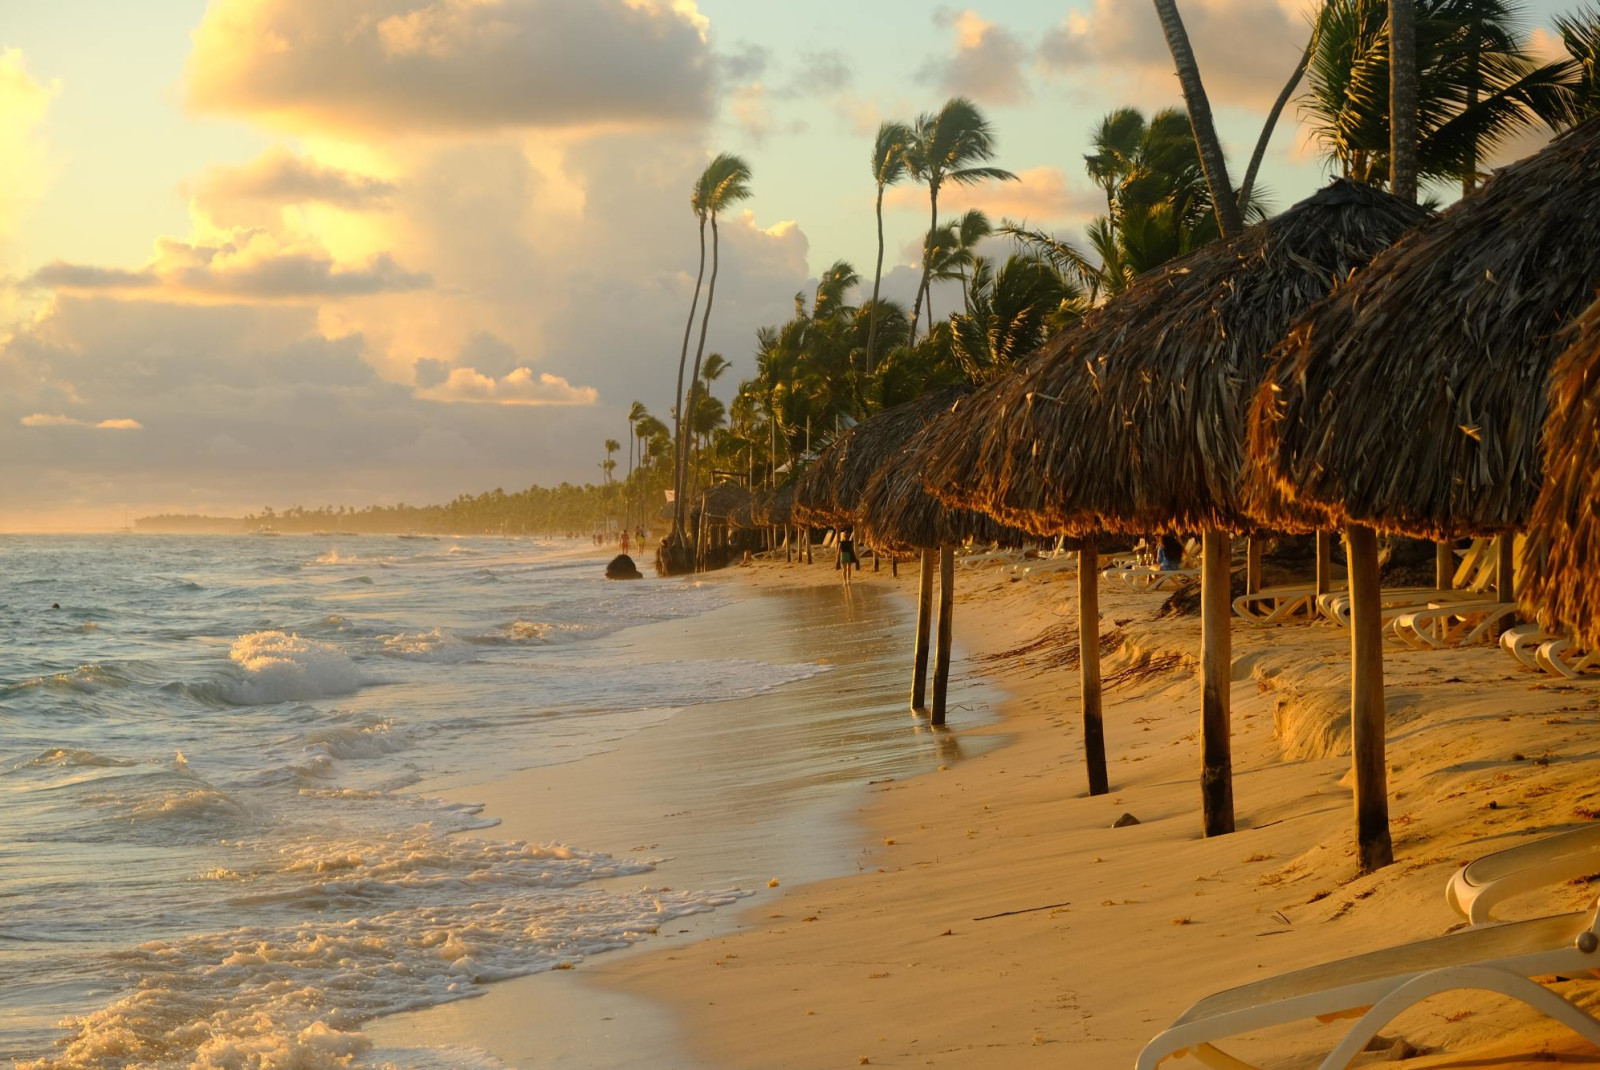 Beach in Punta Cana during sunset, reflecting light against clouds, ocean and sand with straw huts and palm trees.